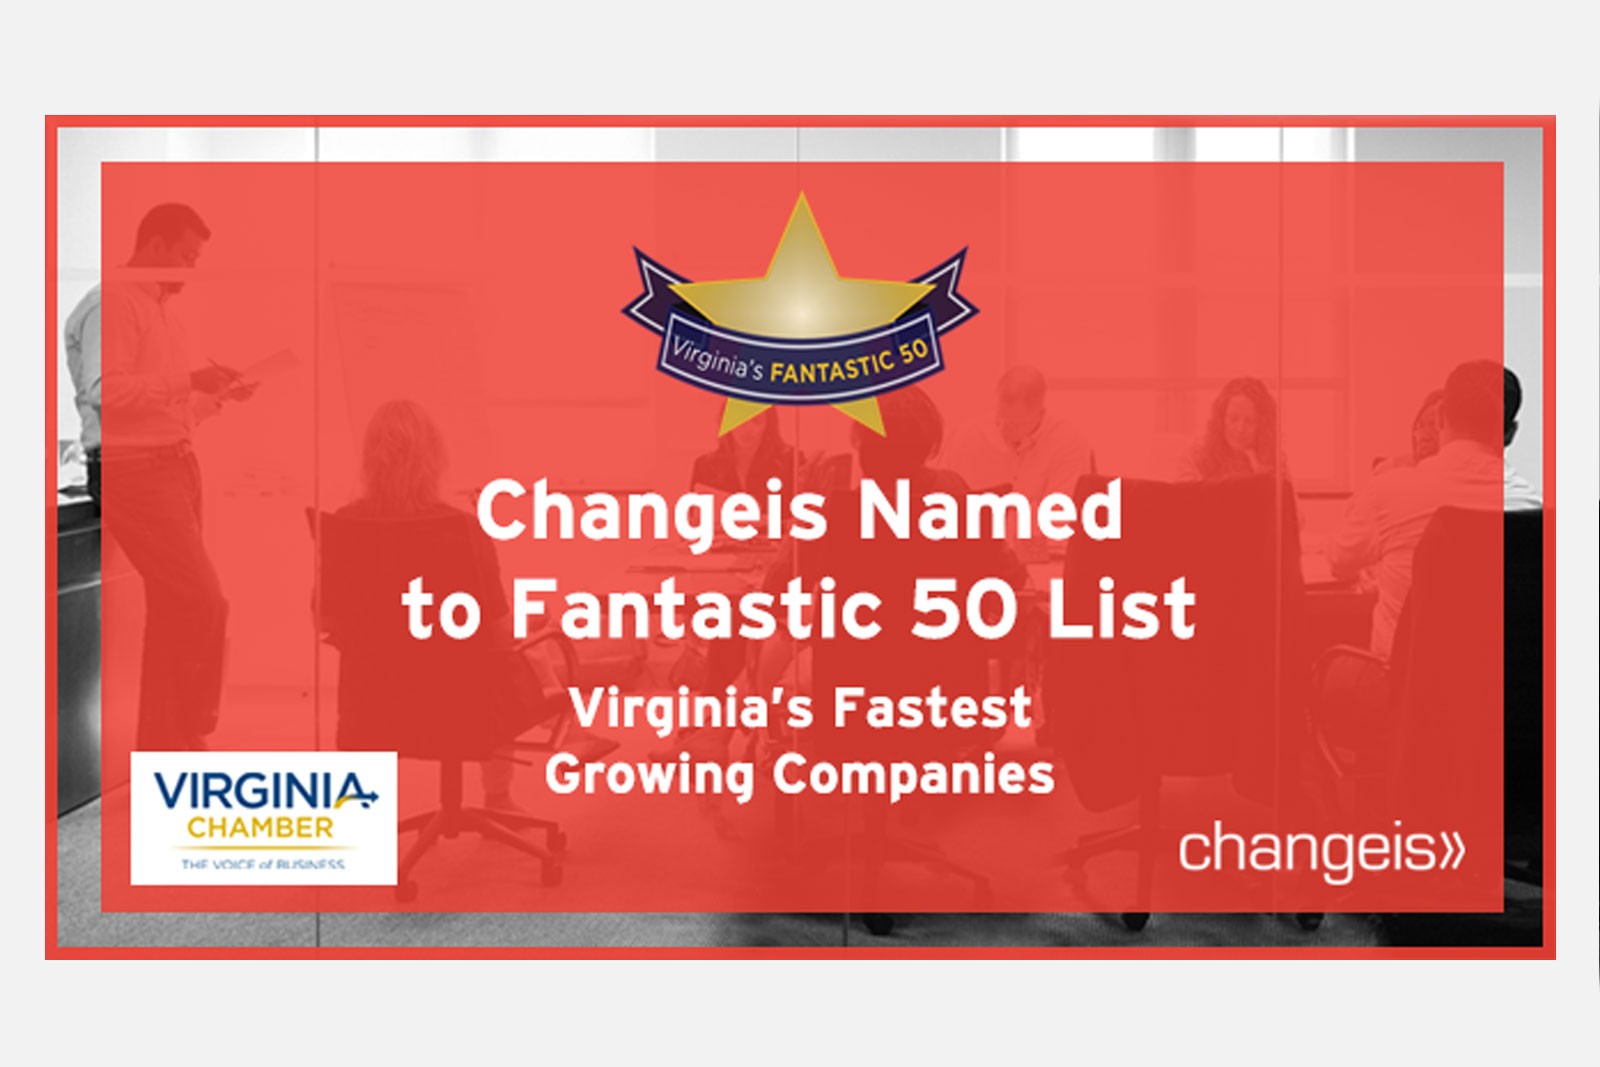 Changeis Named to Fantastic 50 List